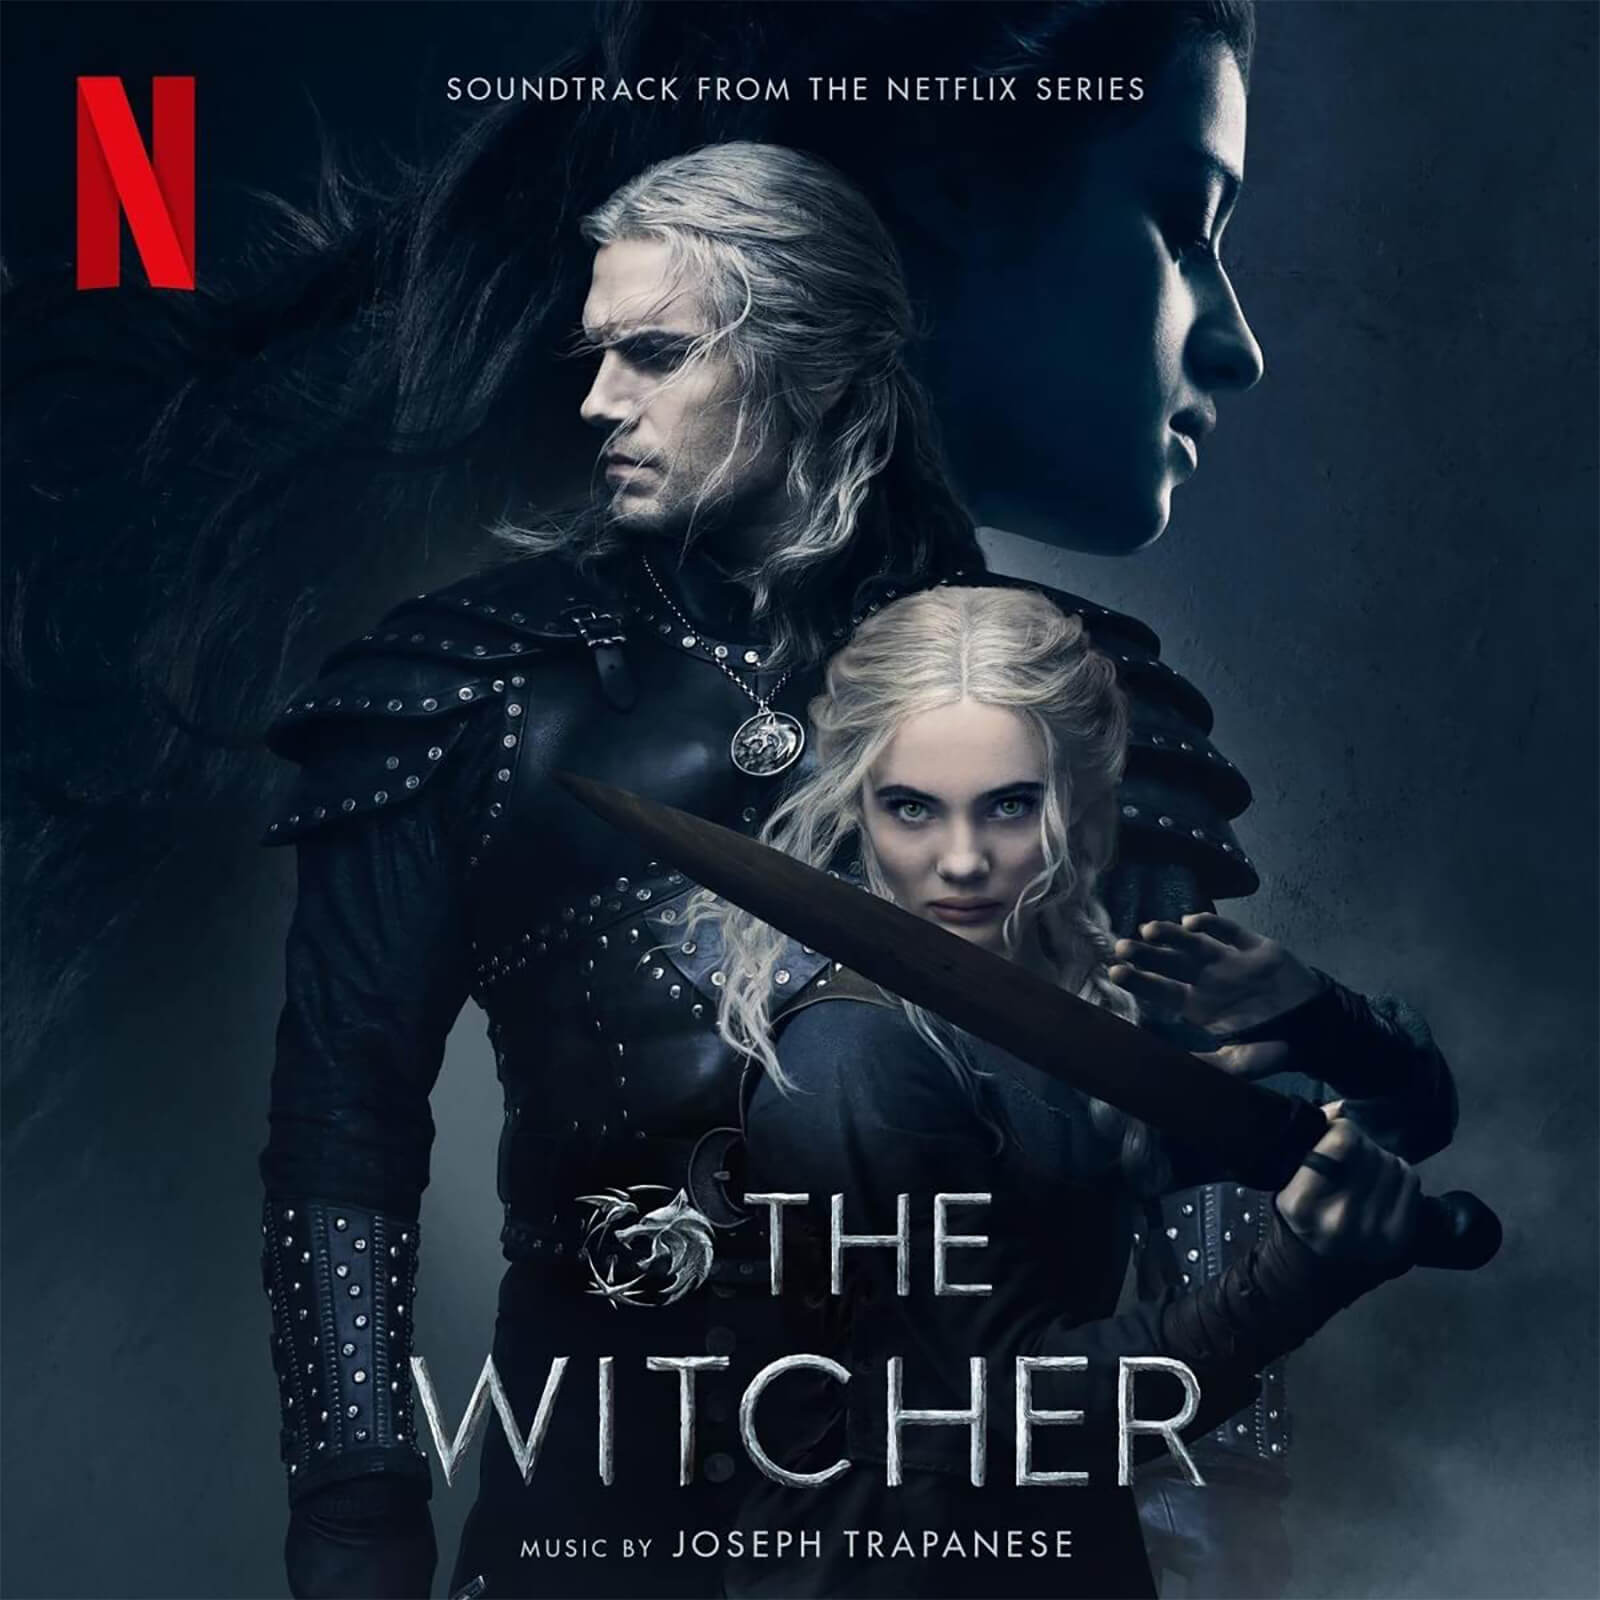 The Witcher: Season 2 (Soundtrack From The Netflix Original Series) Red Vinyl